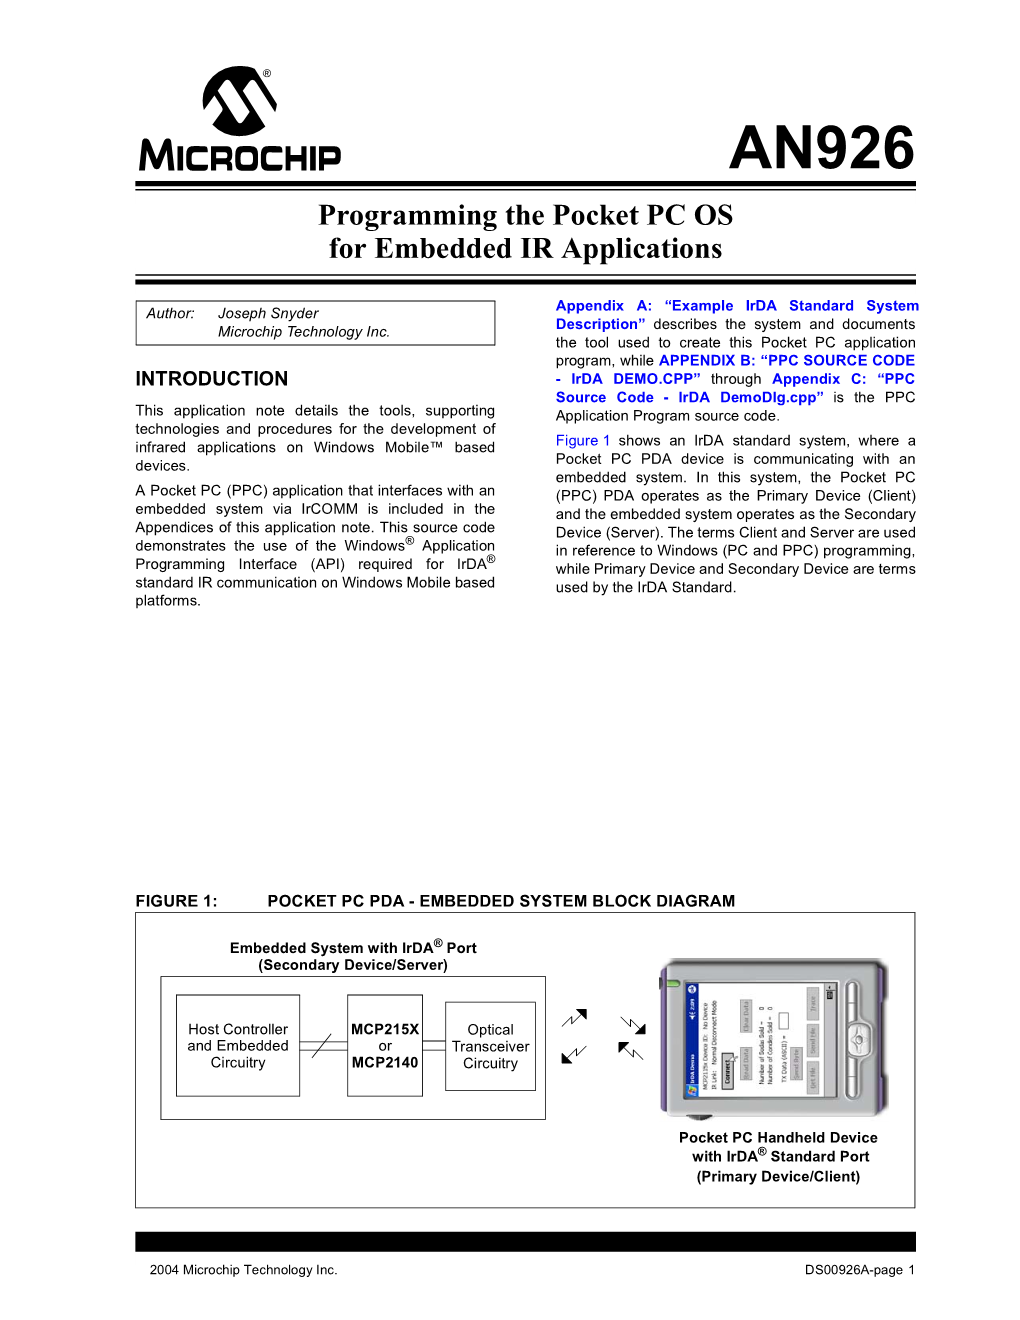 Programming the Pocket PC OS for Embedded IR Applications